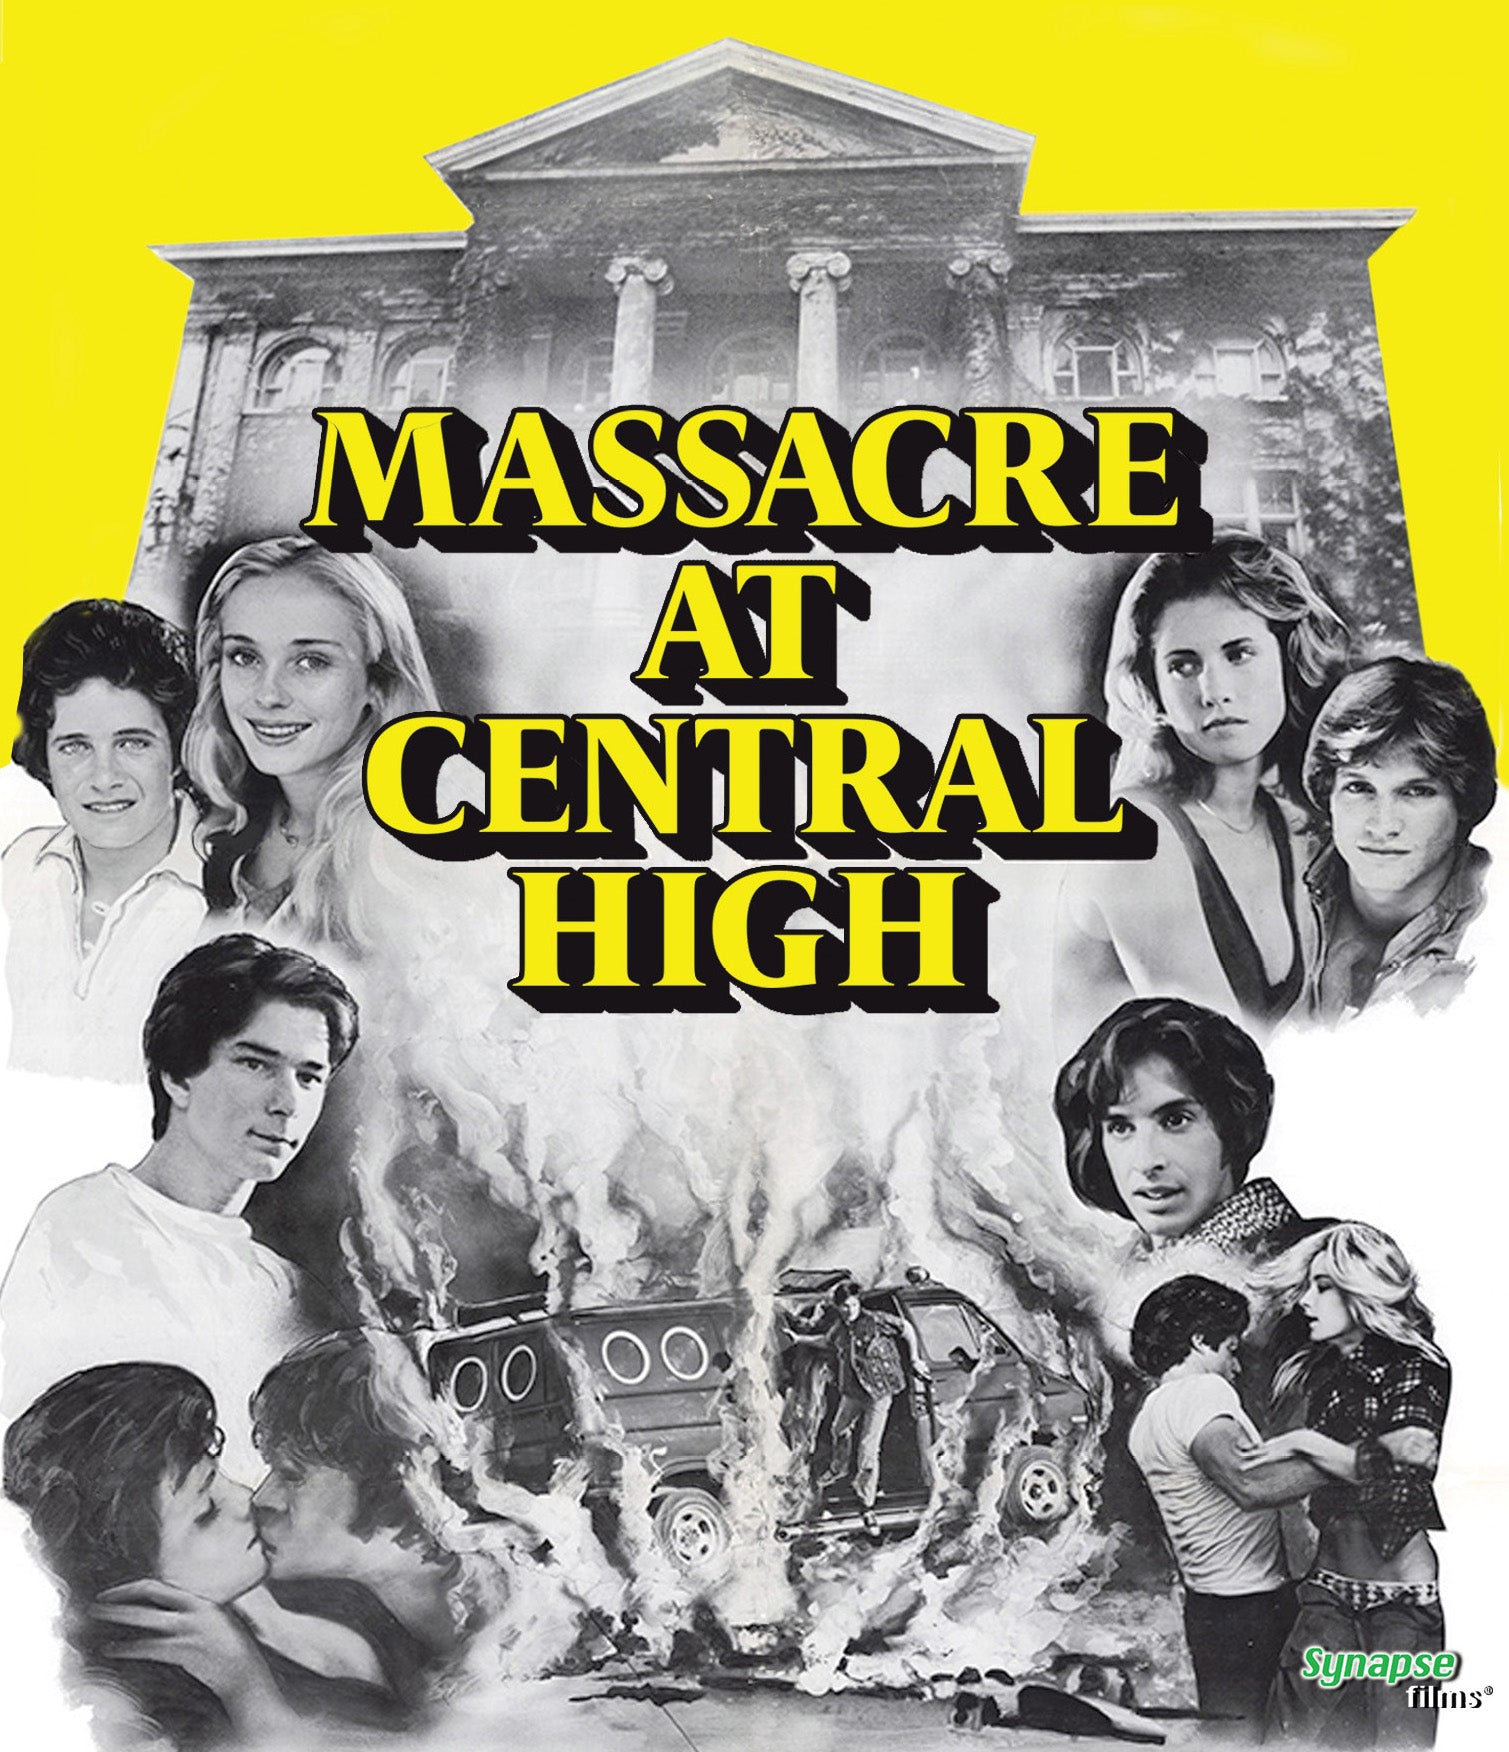 MASSACRE AT CENTRAL HIGH BLU-RAY